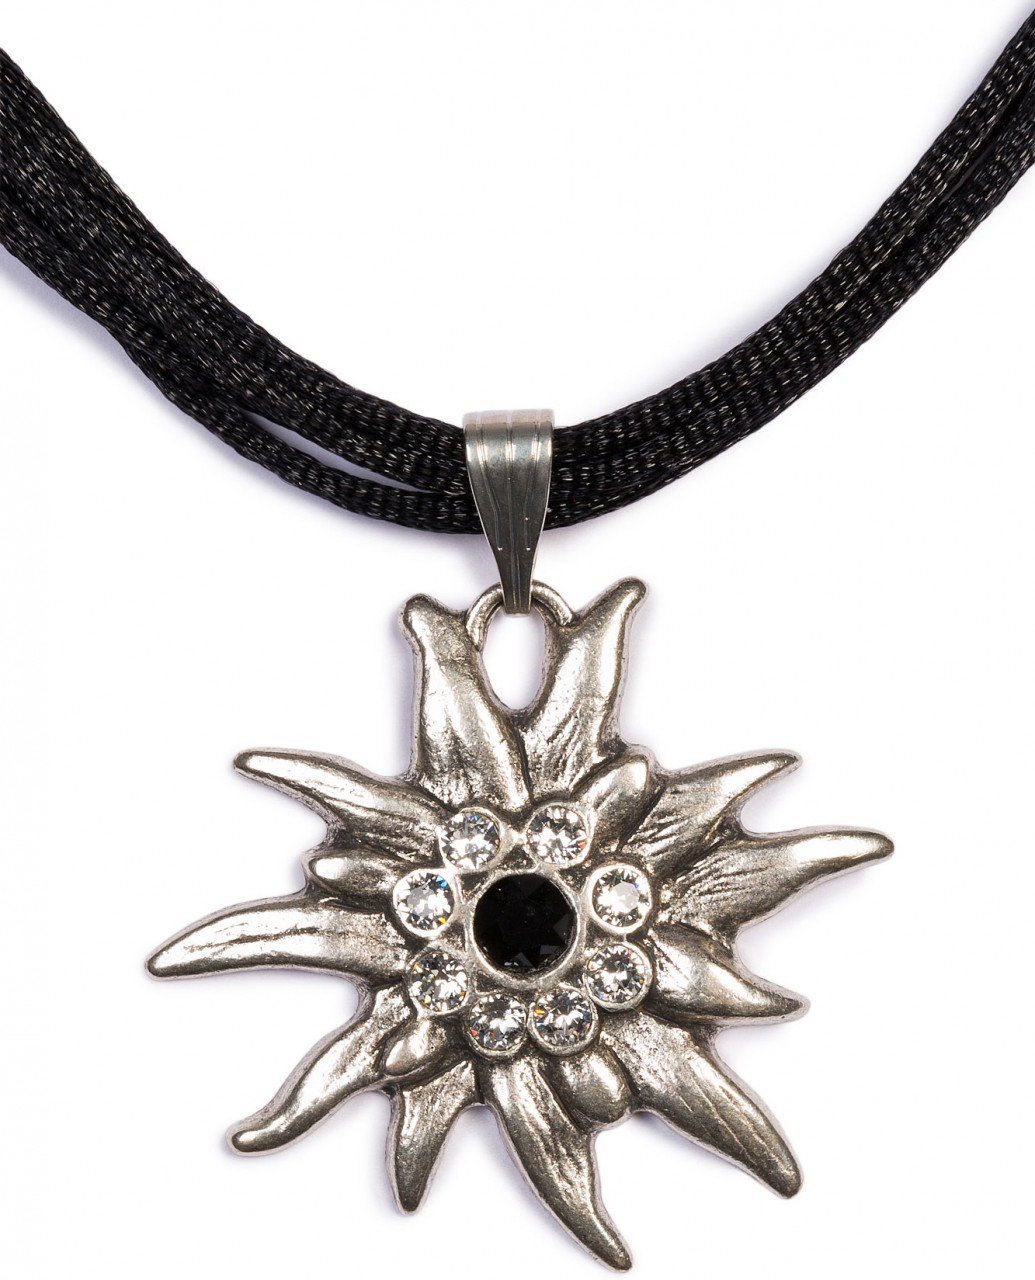 Satin Edelweiss Necklace, Black